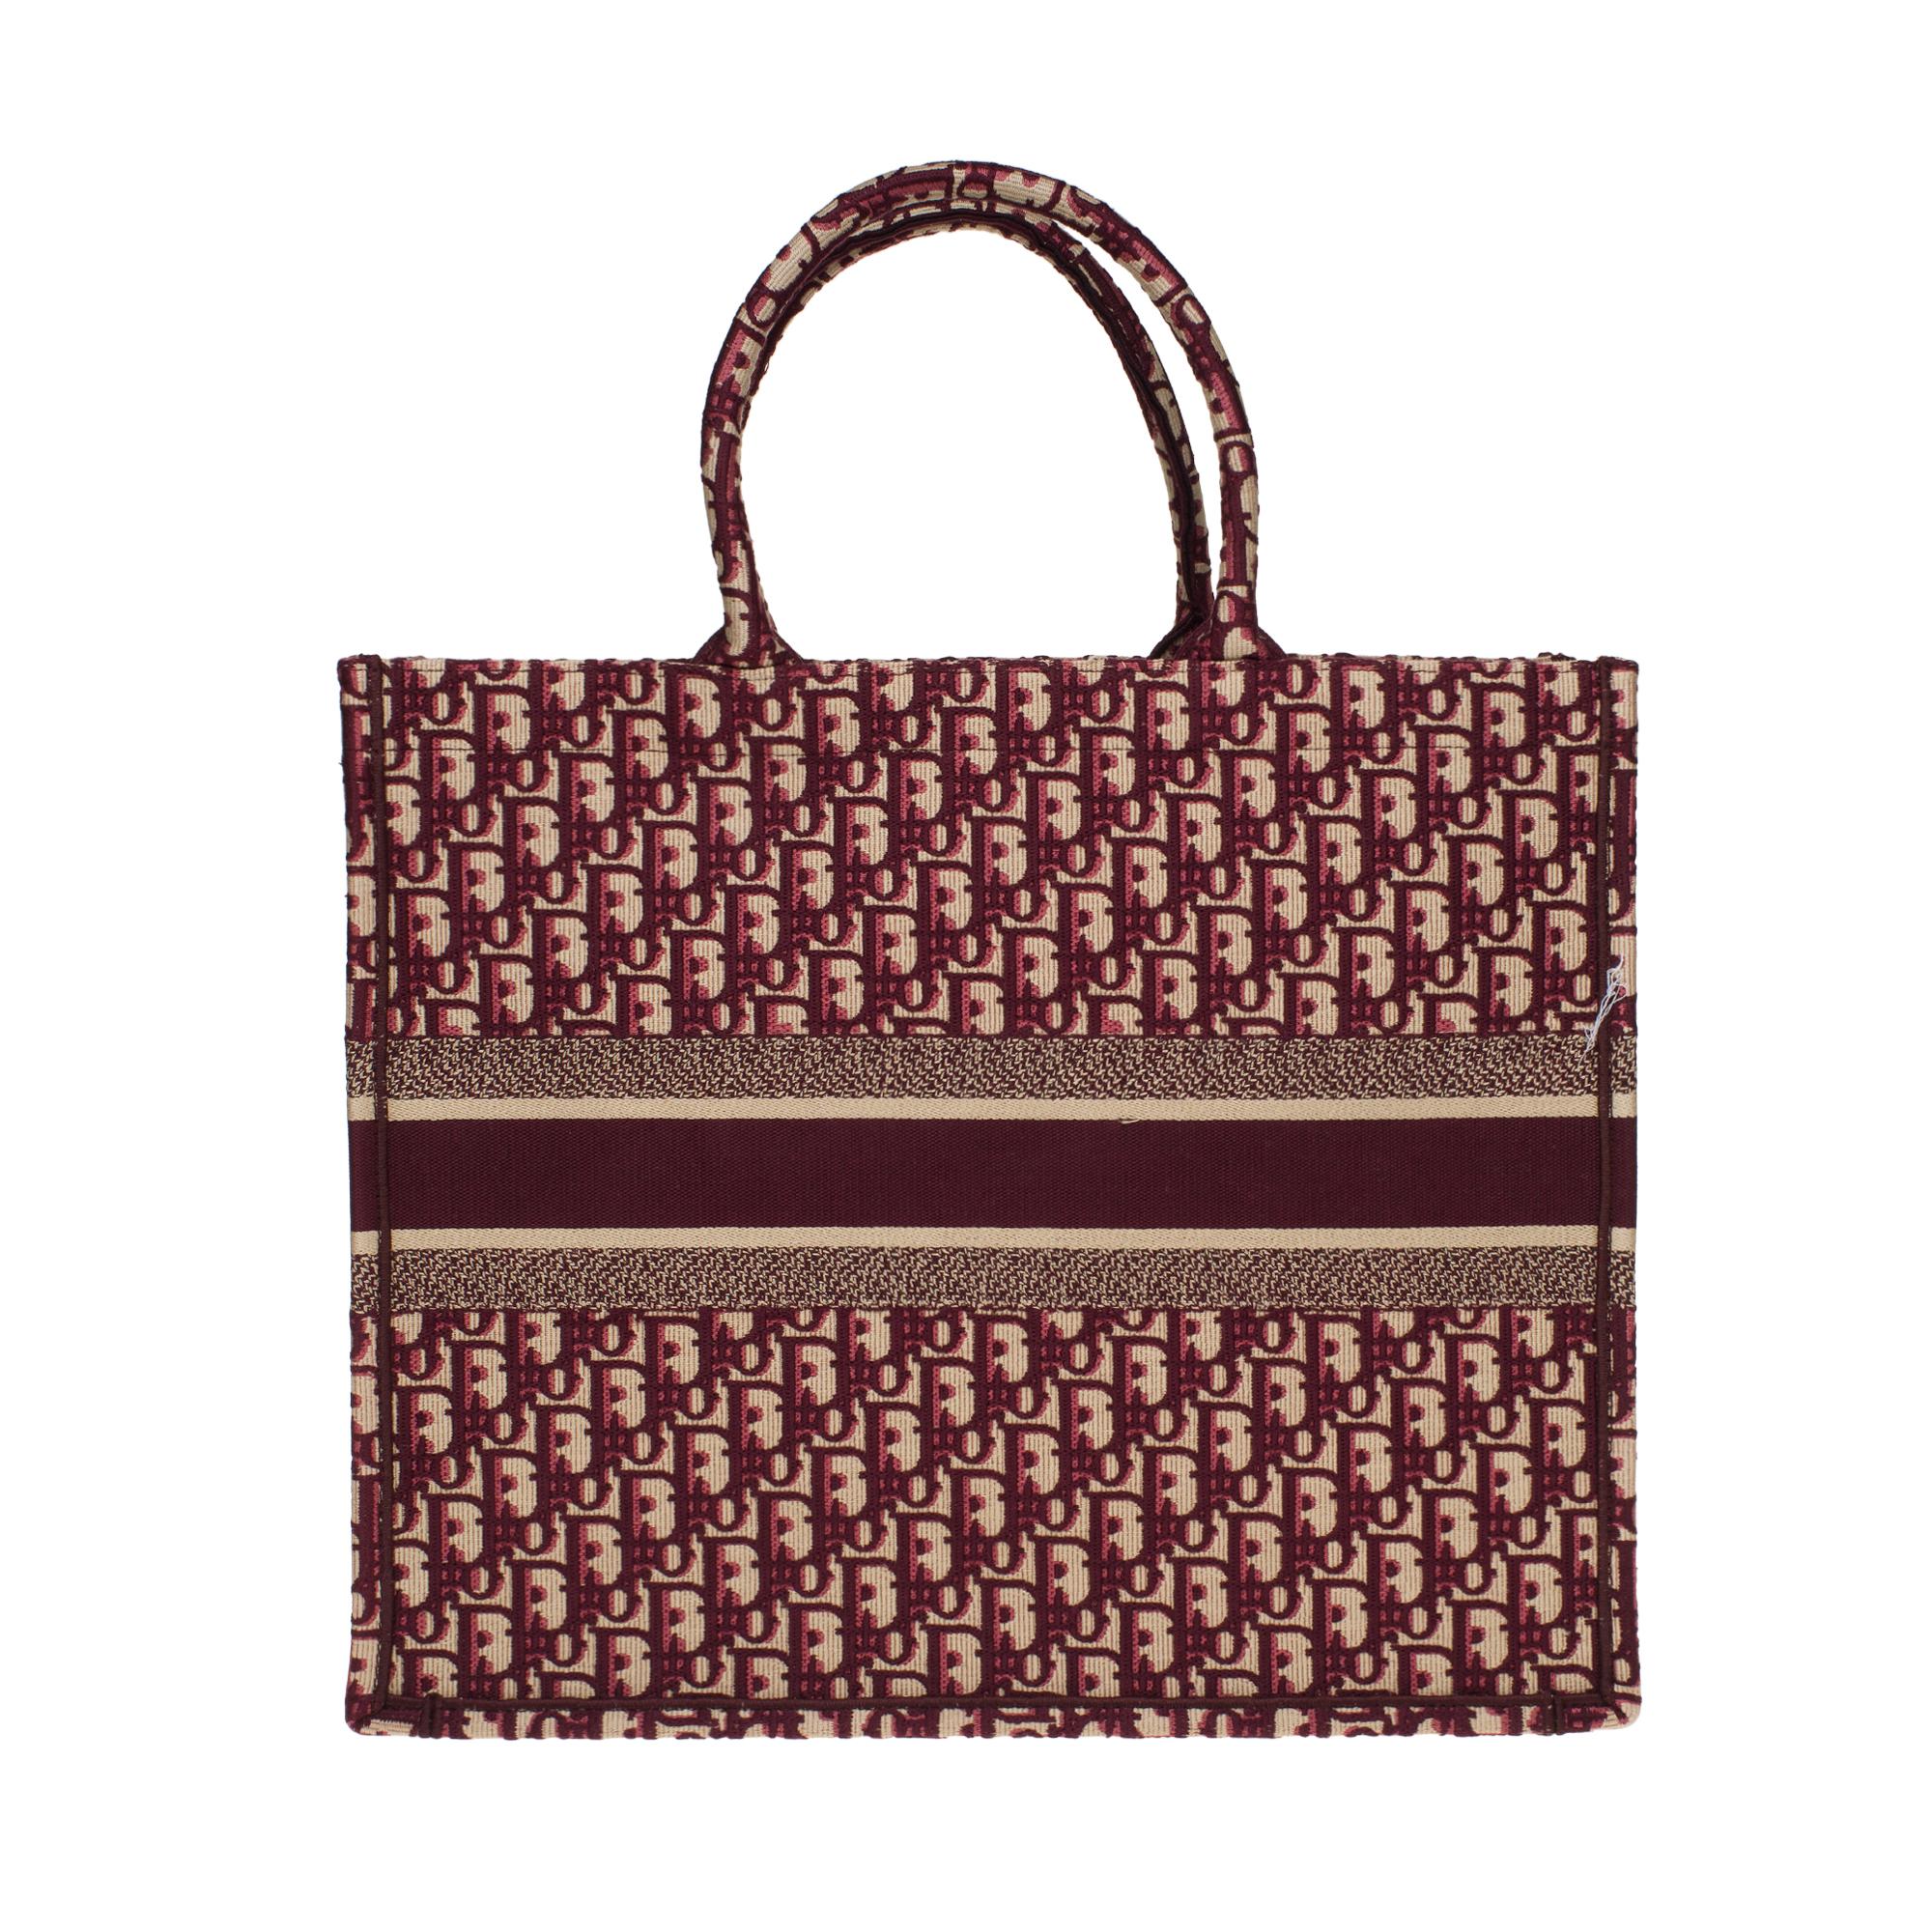 The Iconic Dior Book Tote GM bag in burgundy monogram canvas, double handle in burgundy monogram canvas allowing a hand stand.

Interior in burgundy monogram canvas.
Sold with dustbag, authenticity card.
Signature: 